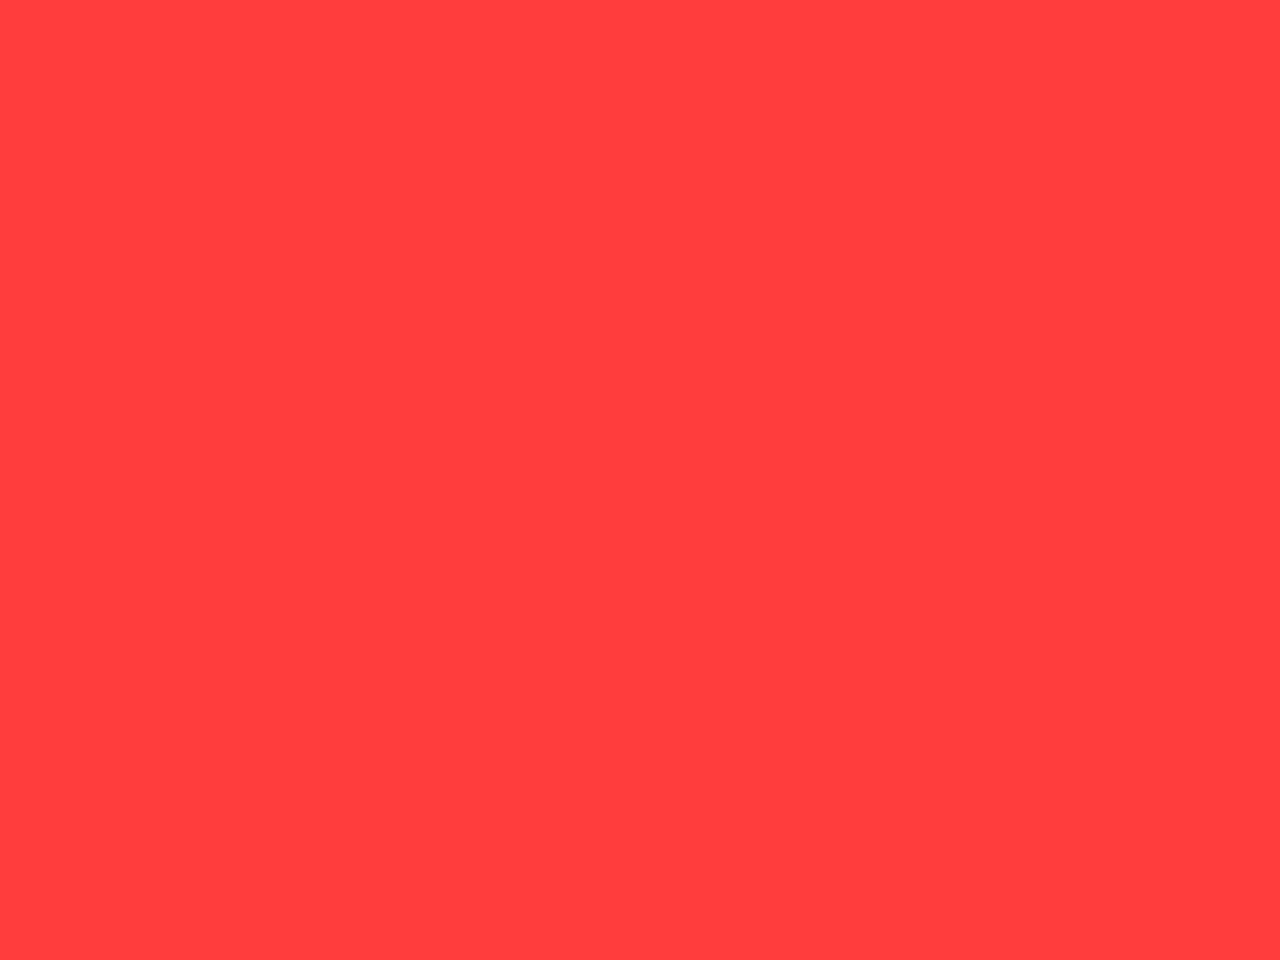 1280x960 Coral Red Solid Color Background